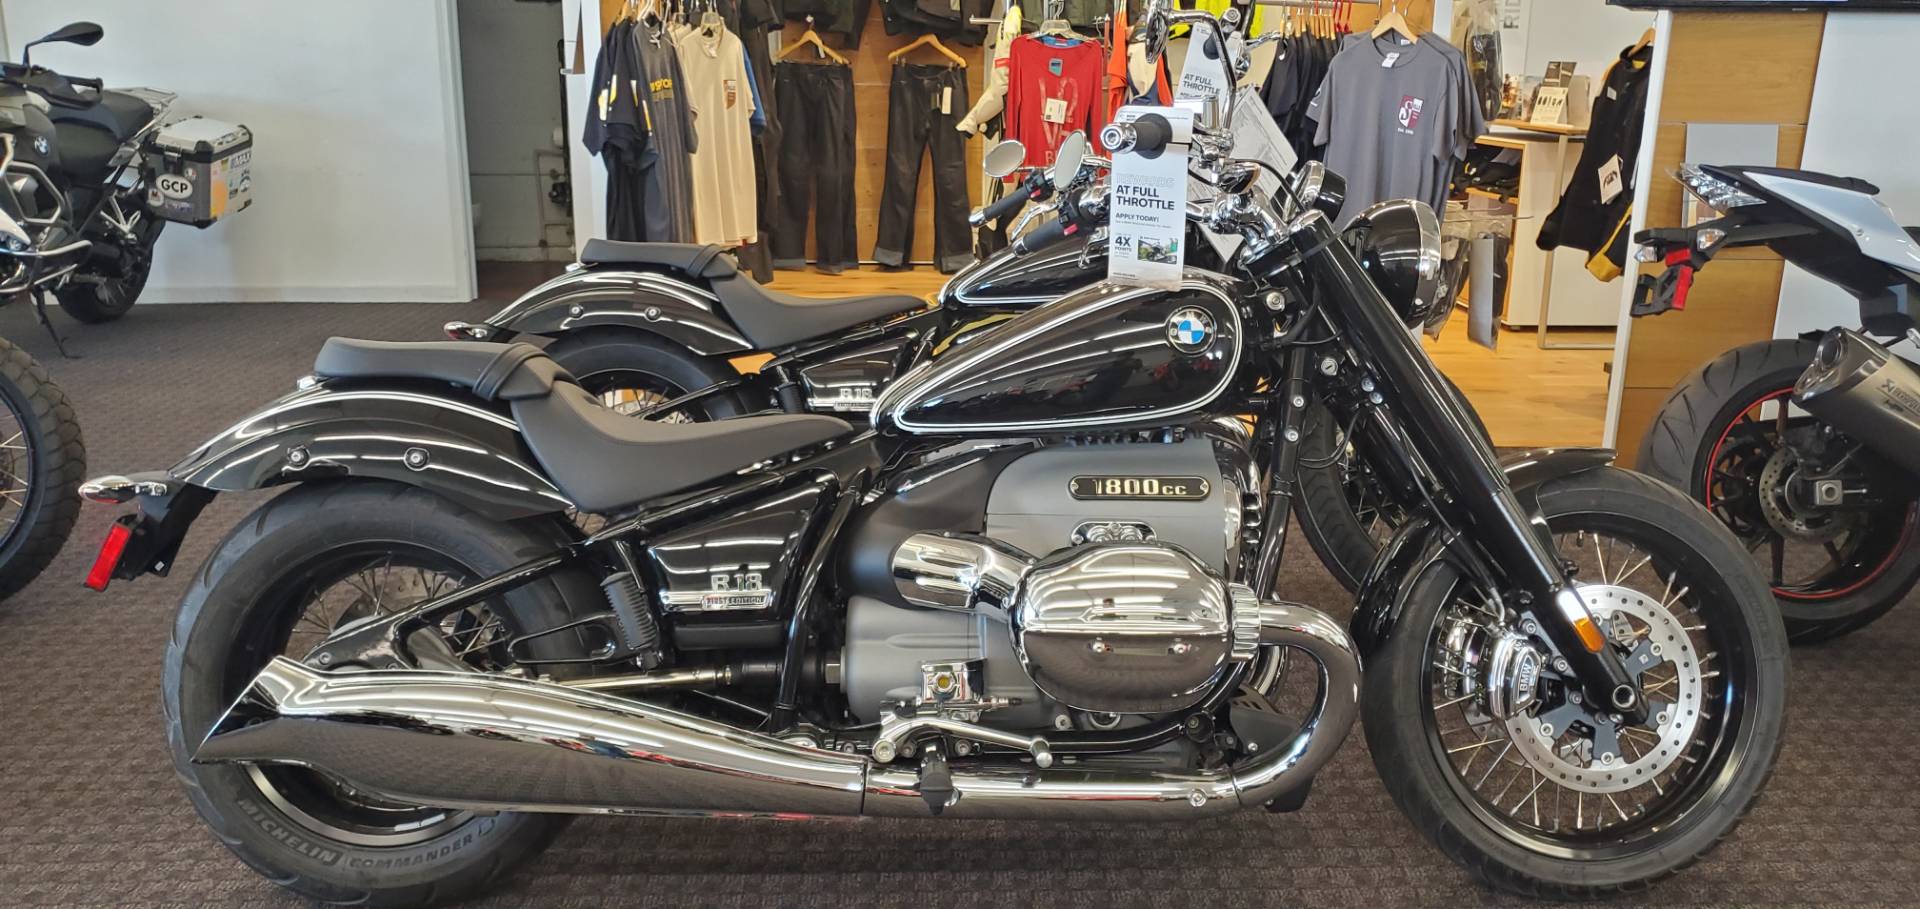 Bmw Motorcycle Dealers Cleveland Ohio - Motorcycle for Life